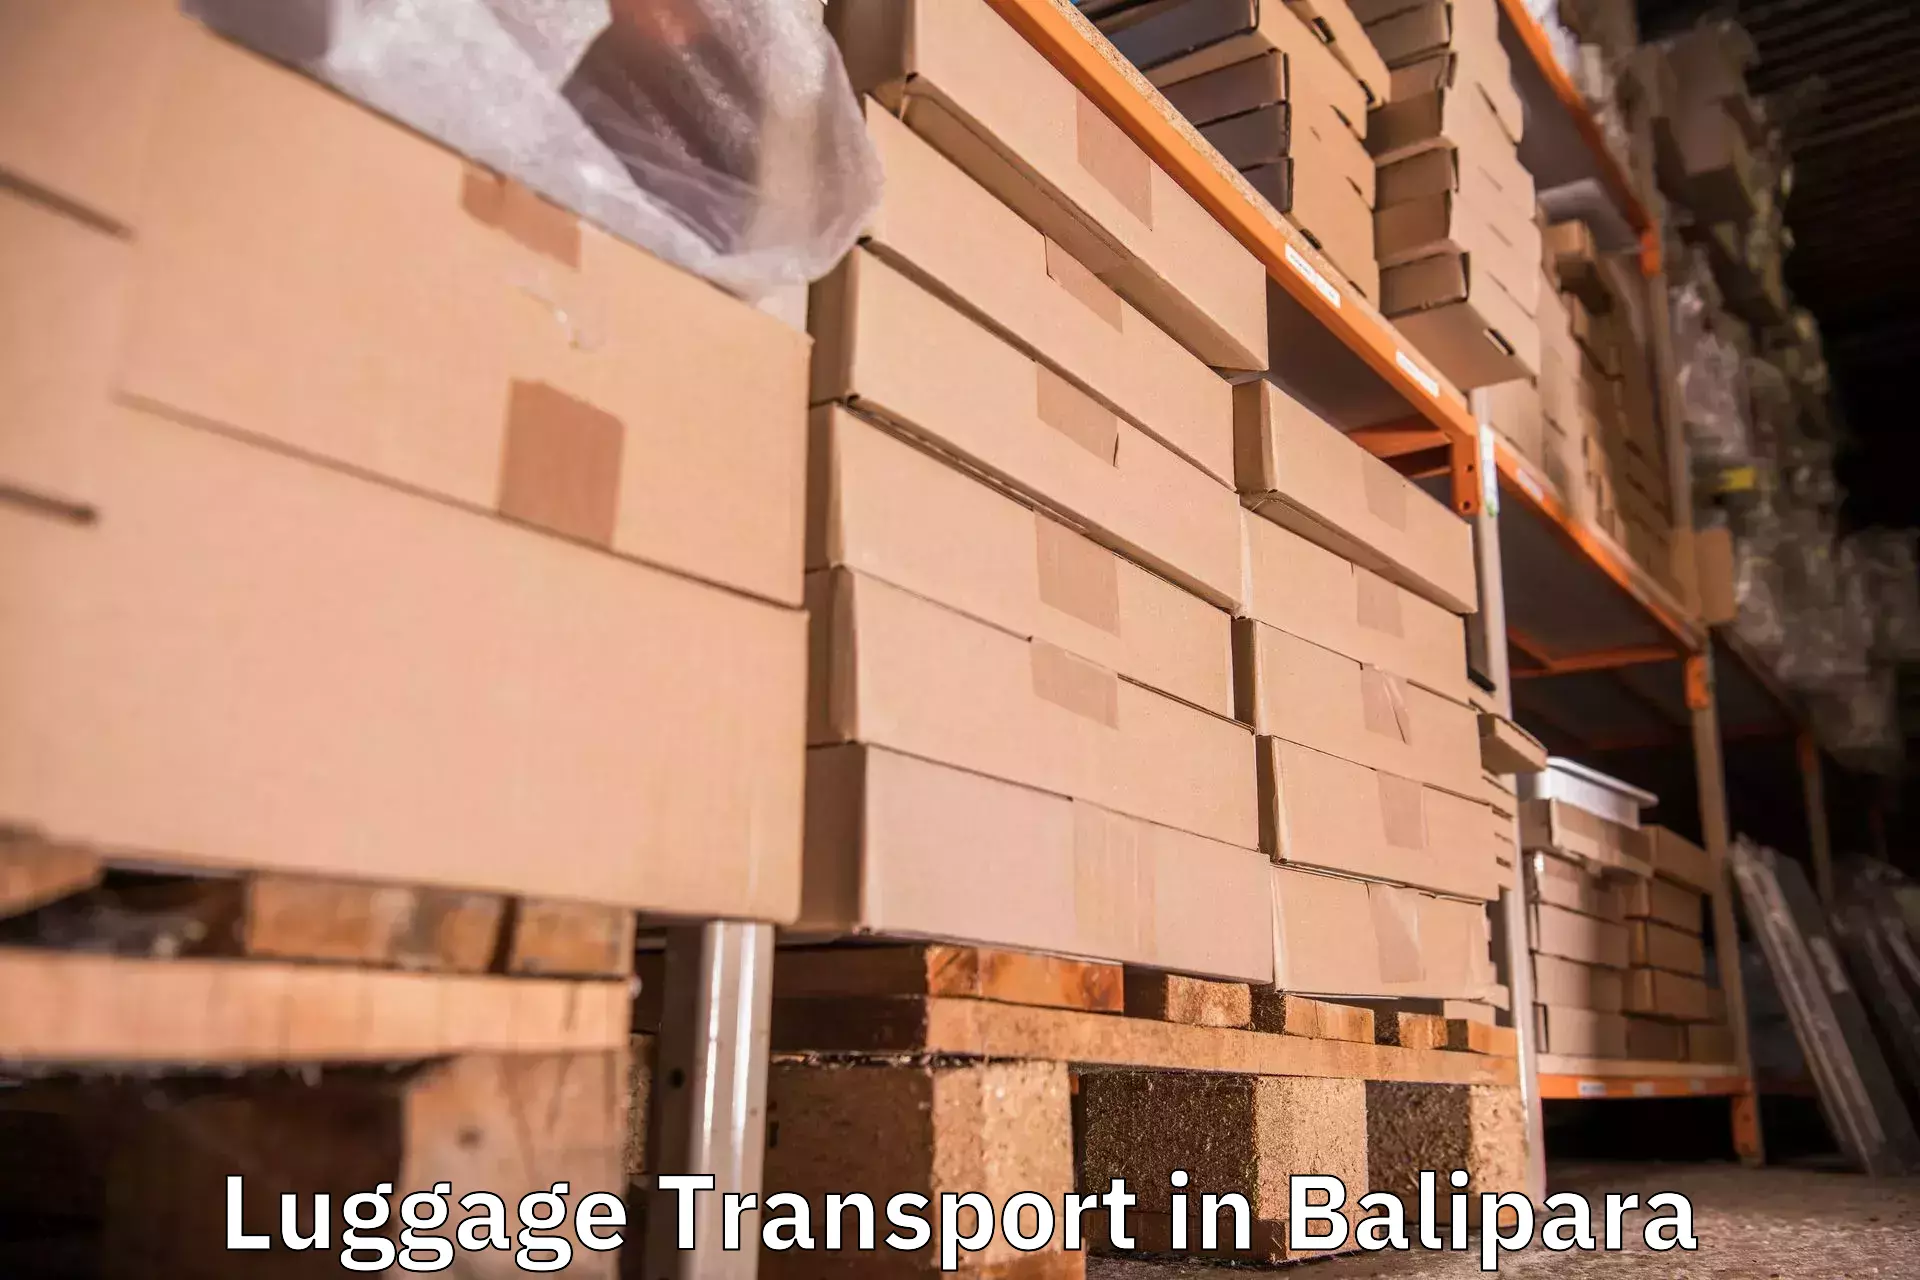 Luggage transport solutions in Balipara